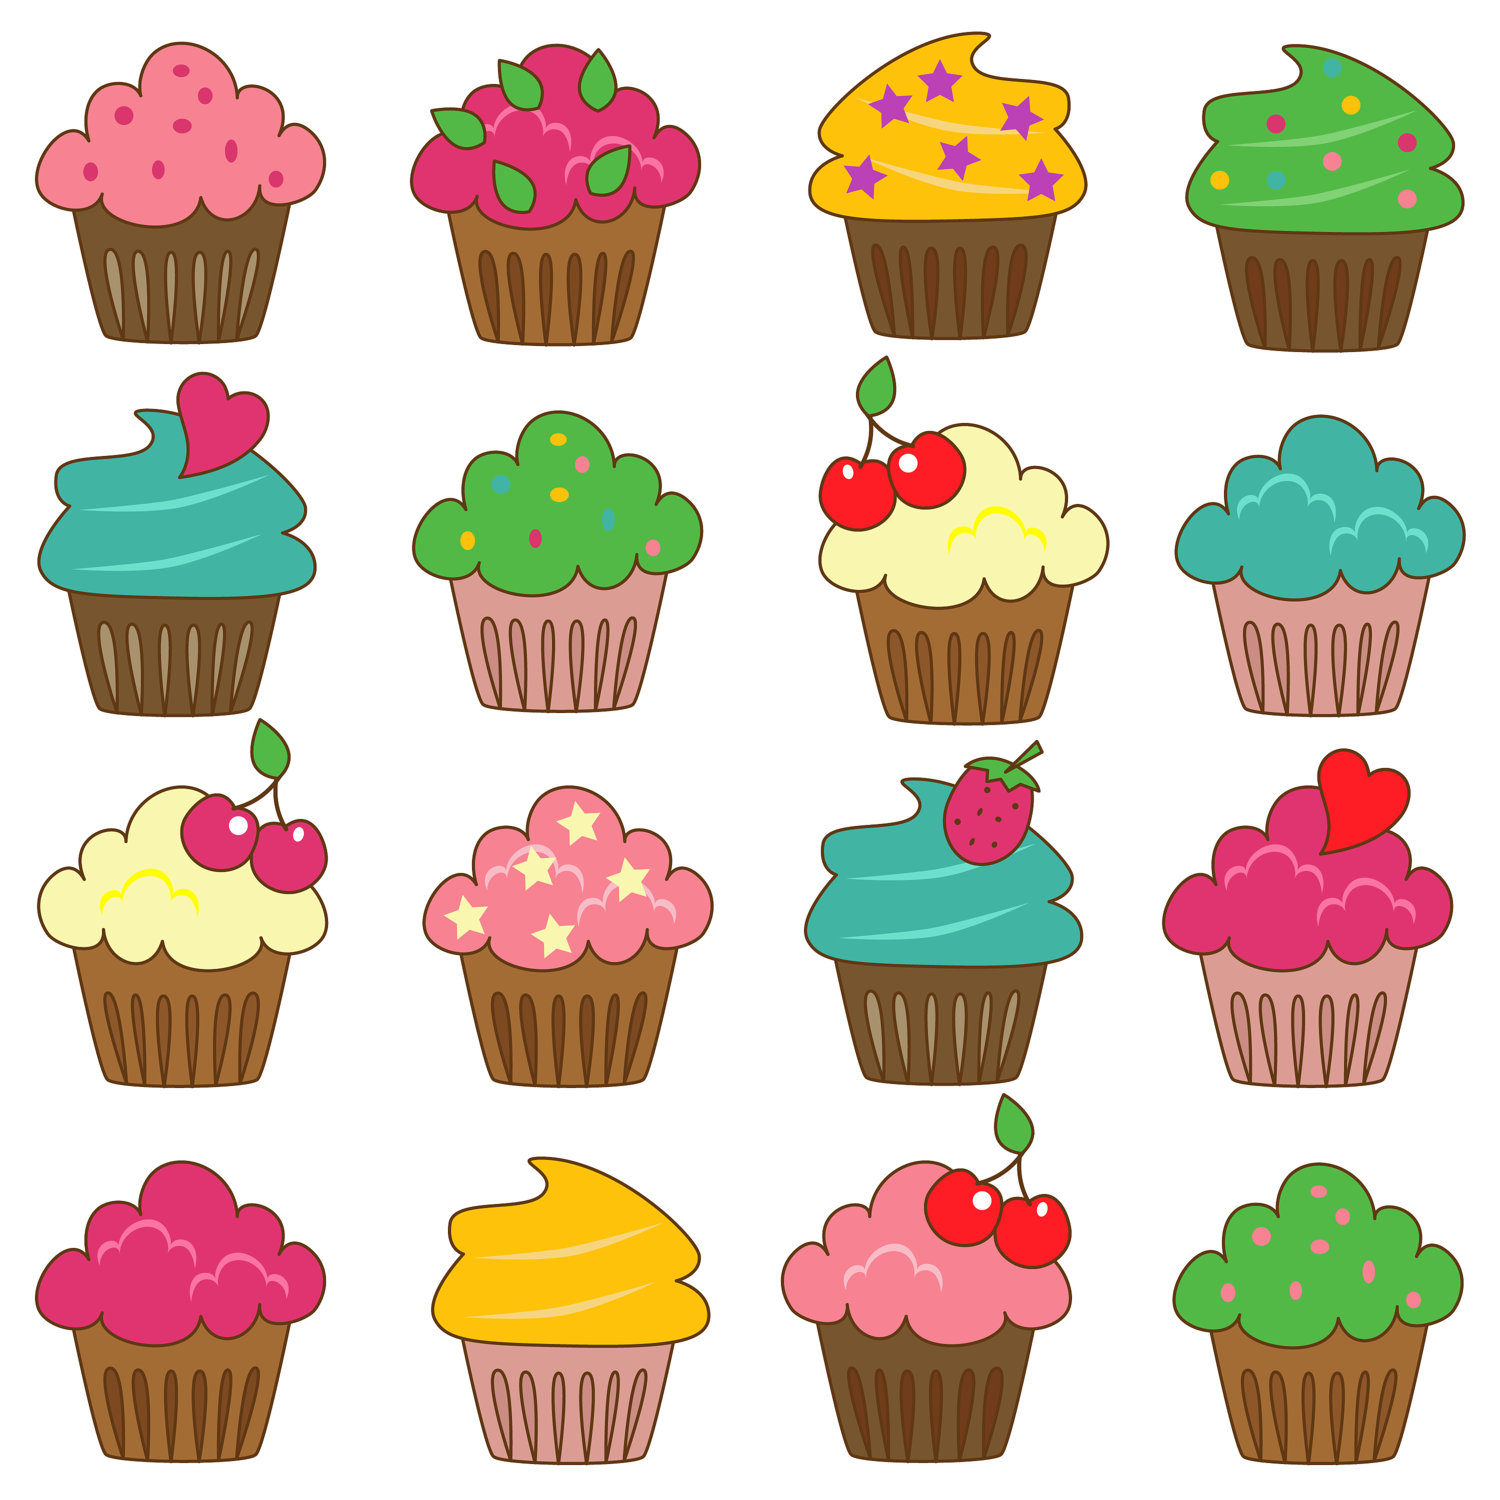 Cupcakes Clip Art Clipart - Commercial and Personal · Cupcakes Clip Art Clipart - Commercial and Personal... $6.00 USD PinkPueblo